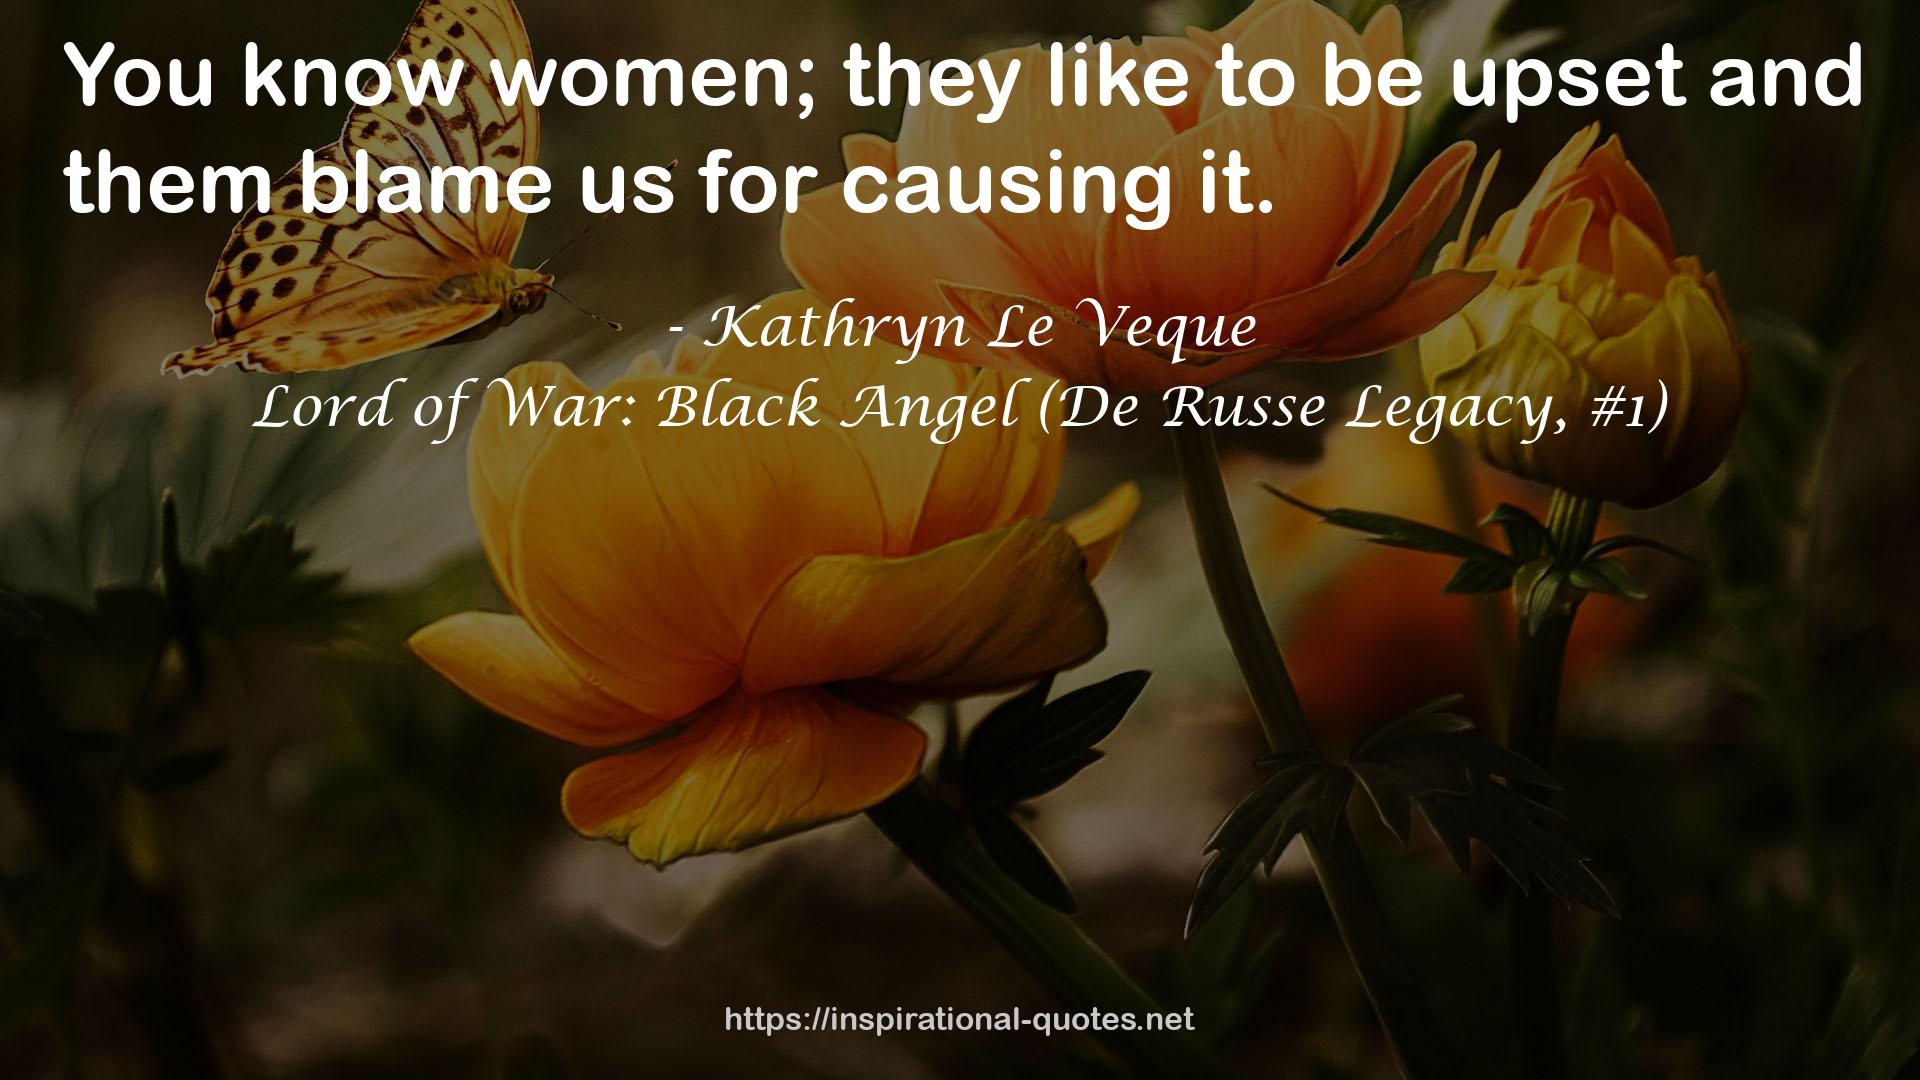 Lord of War: Black Angel (De Russe Legacy, #1) QUOTES